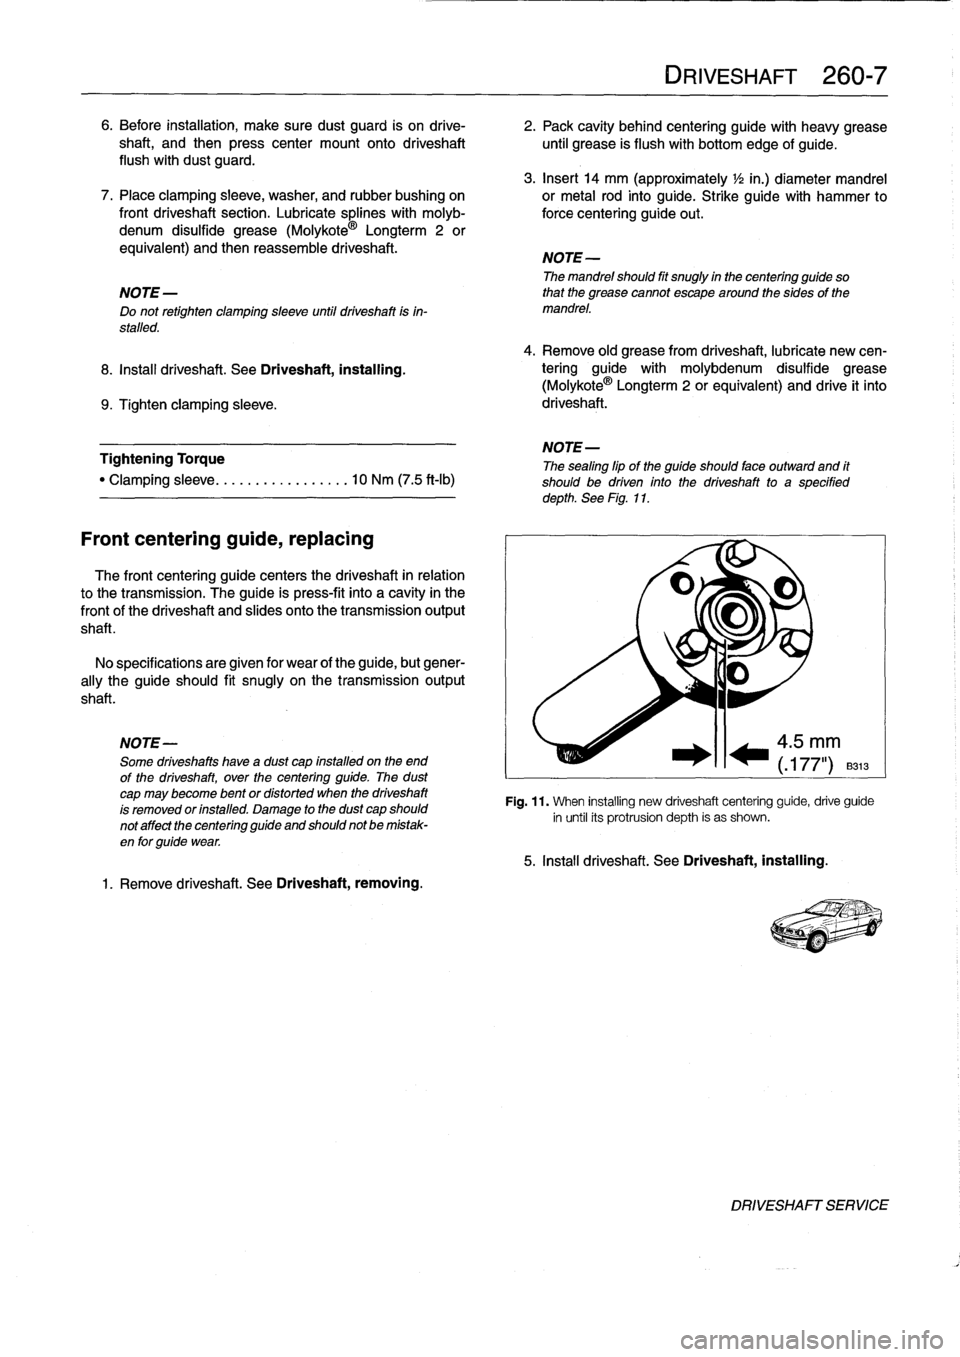 BMW 328i 1995 E36 Owners Manual 6
.
Before
installation,
make
sure
dust
guard
is
on
drive-

	

2
.
Pack
cavity
behind
centering
guide
with
heavy
grease
shaft,
and
then
press
center
mount
onto
driveshaft

	

until
grease
is
flush
wit